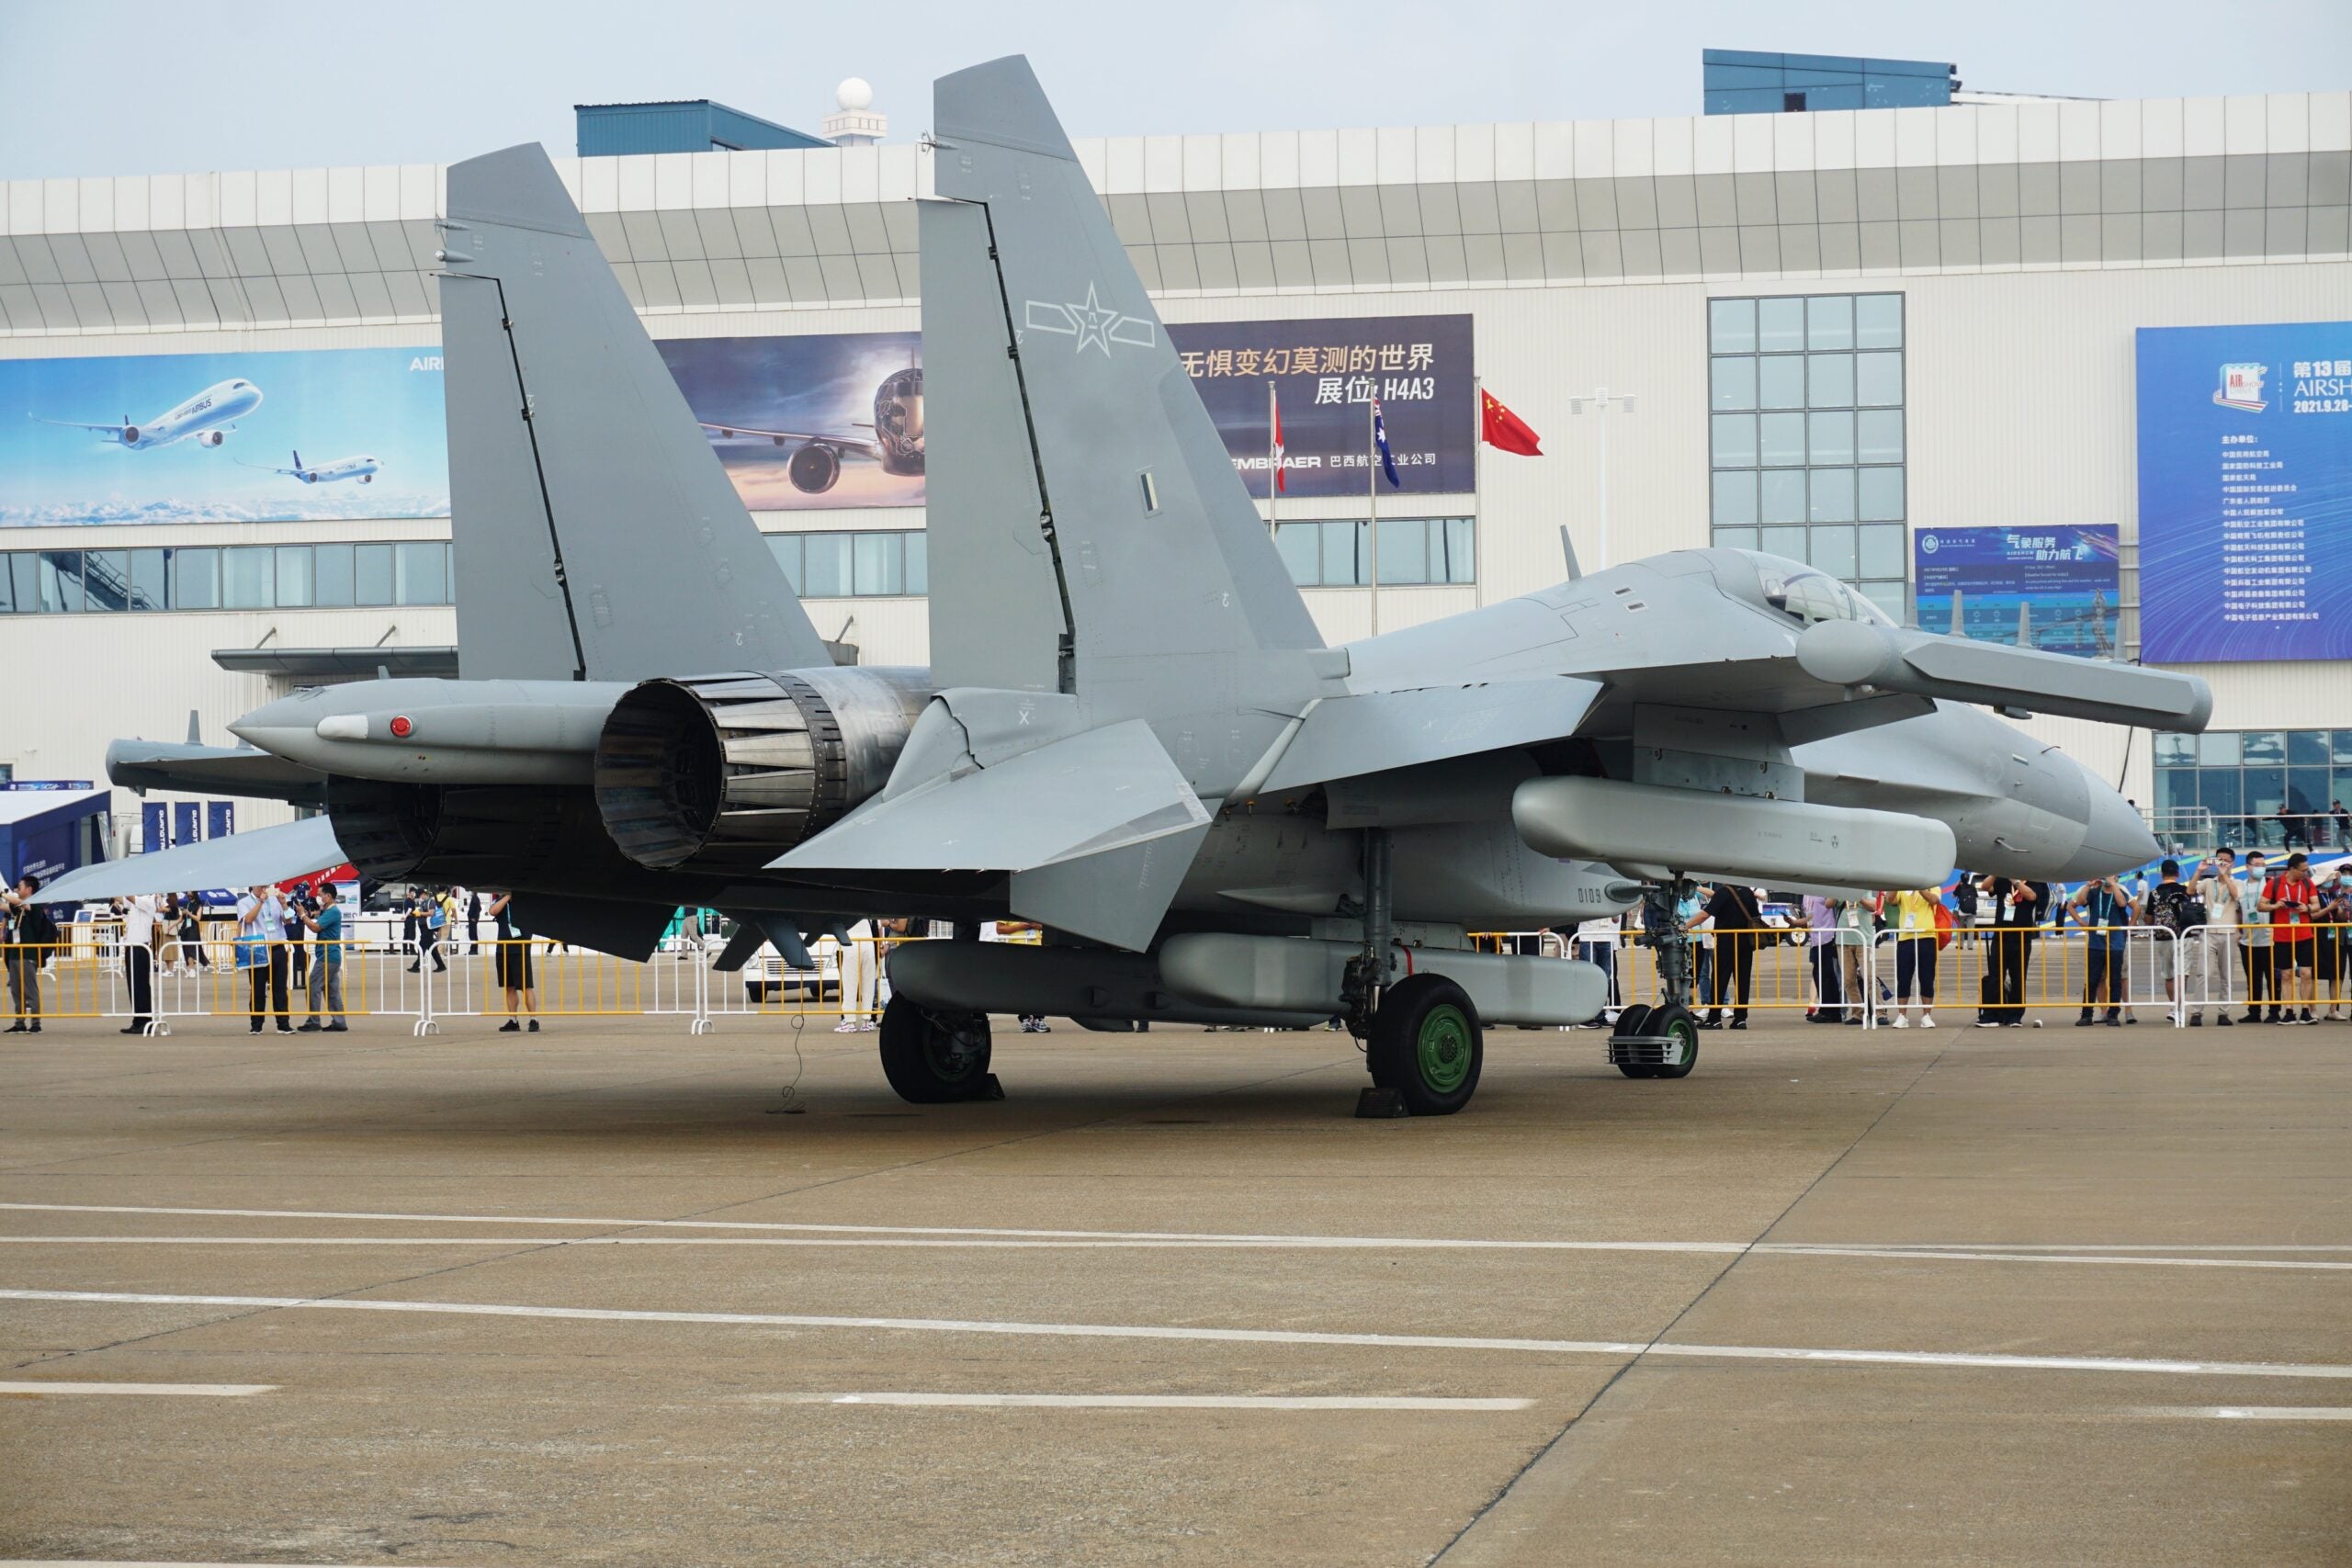 ZHUHAI, CHINA - SEPTEMBER 29: A J-16D electronic warfare jet is on display during the 13th China International Aviation and Aerospace Exhibition (Airshow China 2021) on September 29, 2021 in Zhuhai, Guangdong Province of China. (Photo by Long Wei/VCG via Getty Images)